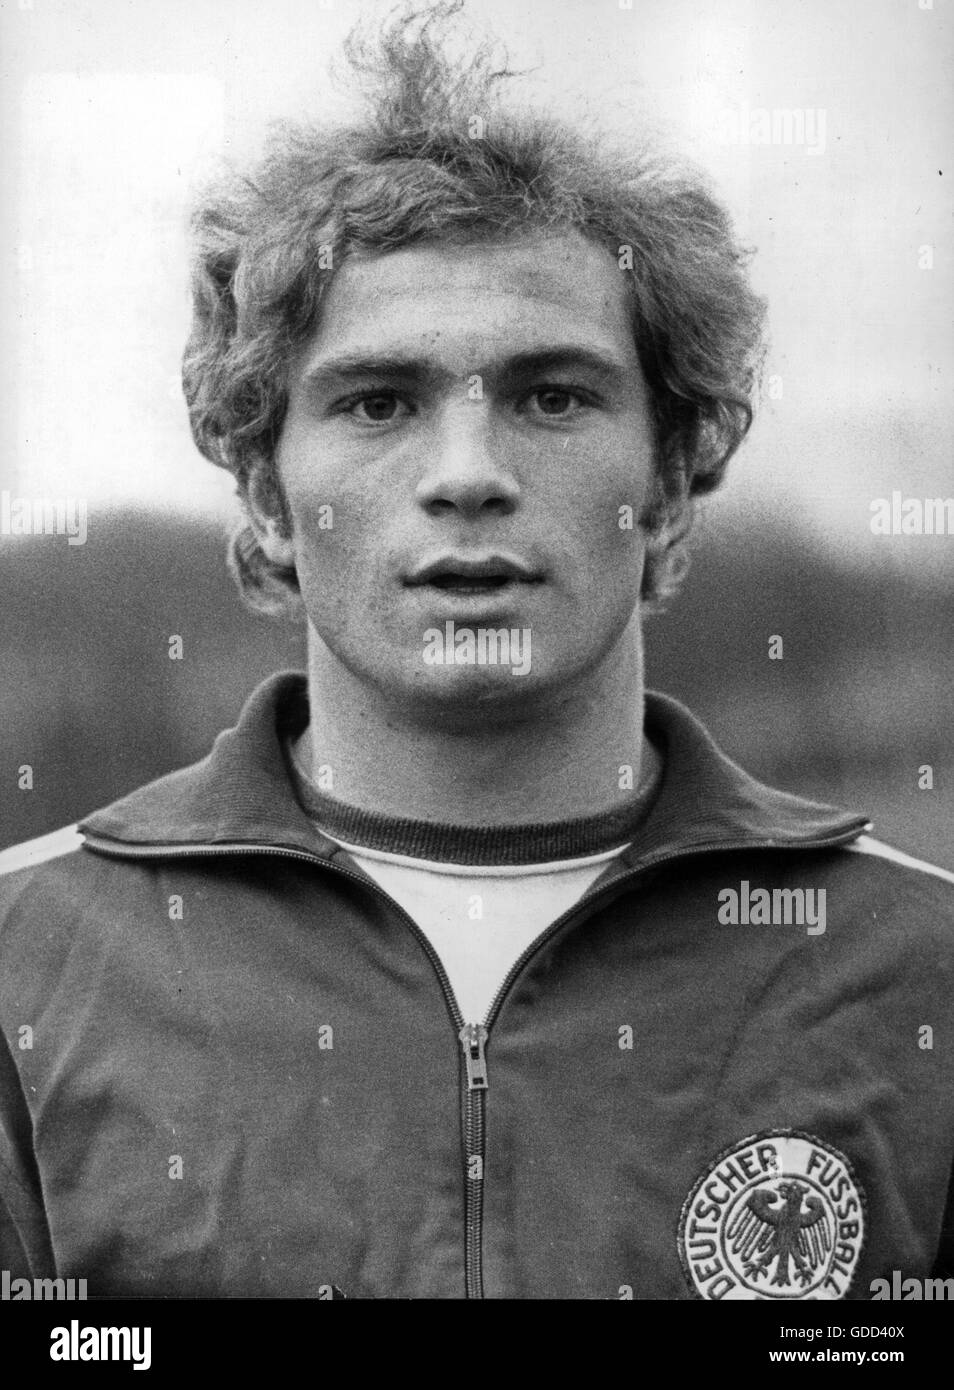 Hoeness, Ulrich 'Uli', * 5.1.1952, German athlete, football functionary and businessman, as player for the German National Team, preparation for the European championship 1972, portrait, 7.11.1971, Stock Photo